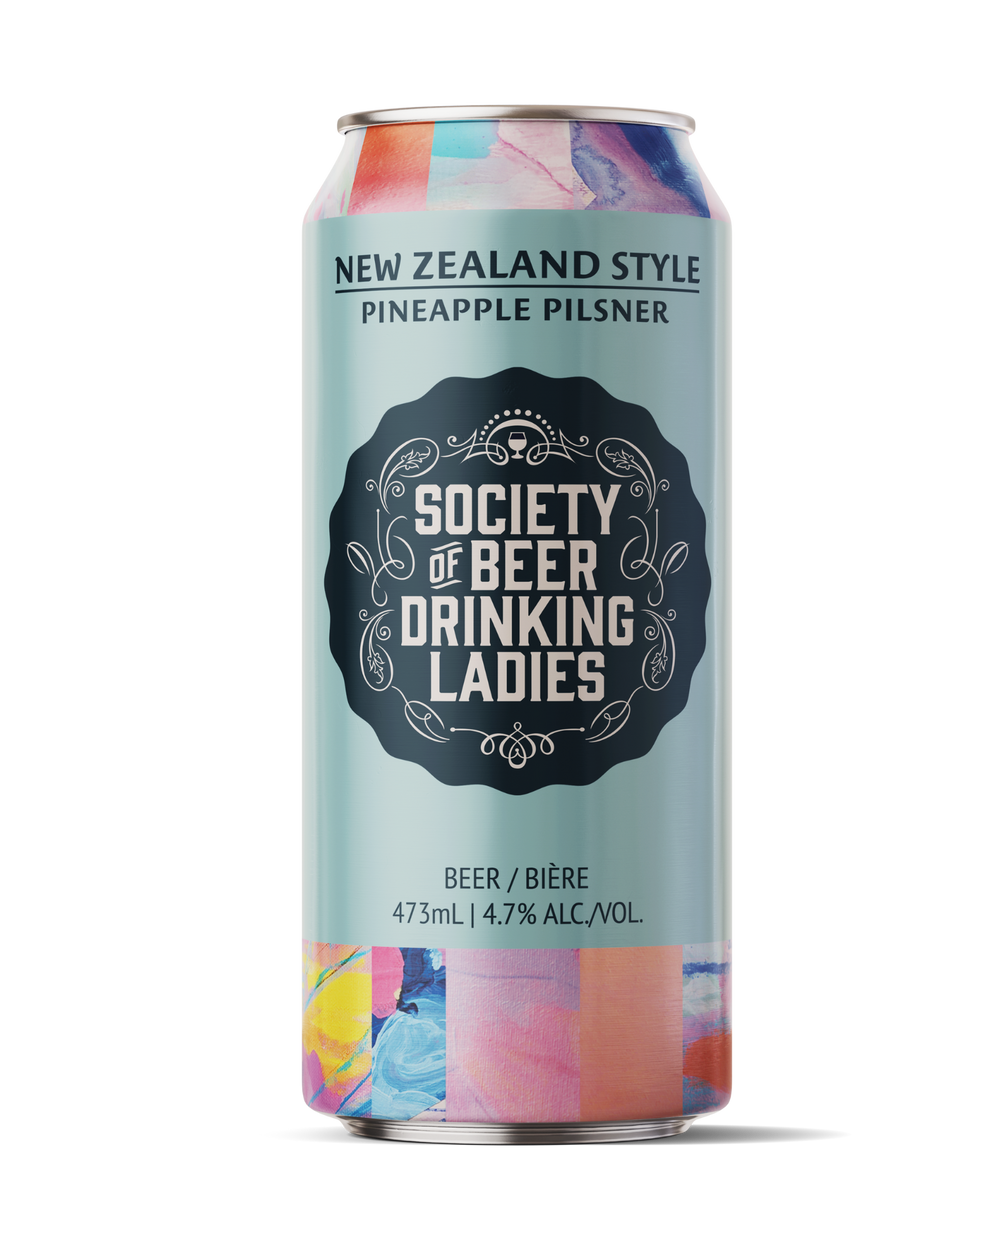 New Zealand Style Pineapple Pilsner - Single Can 12 Pack Price